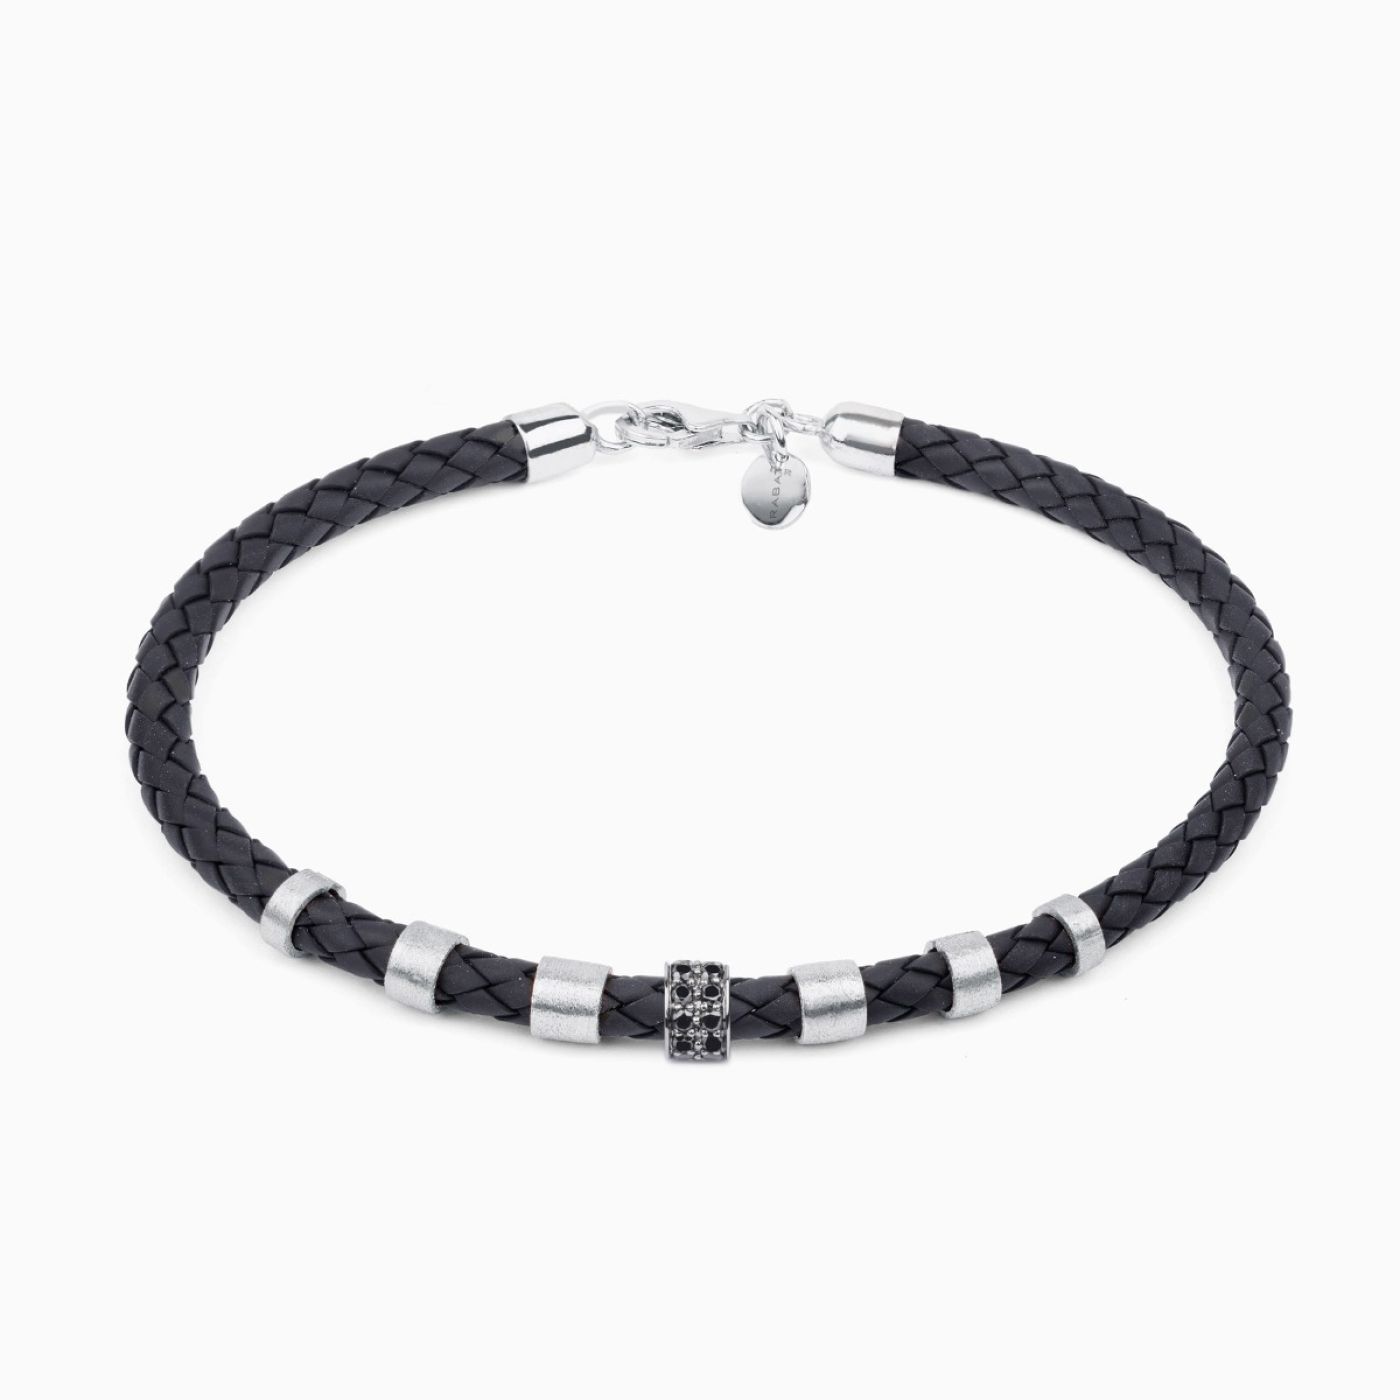 RABAT bracelet made of leather with white gold details and black diamonds